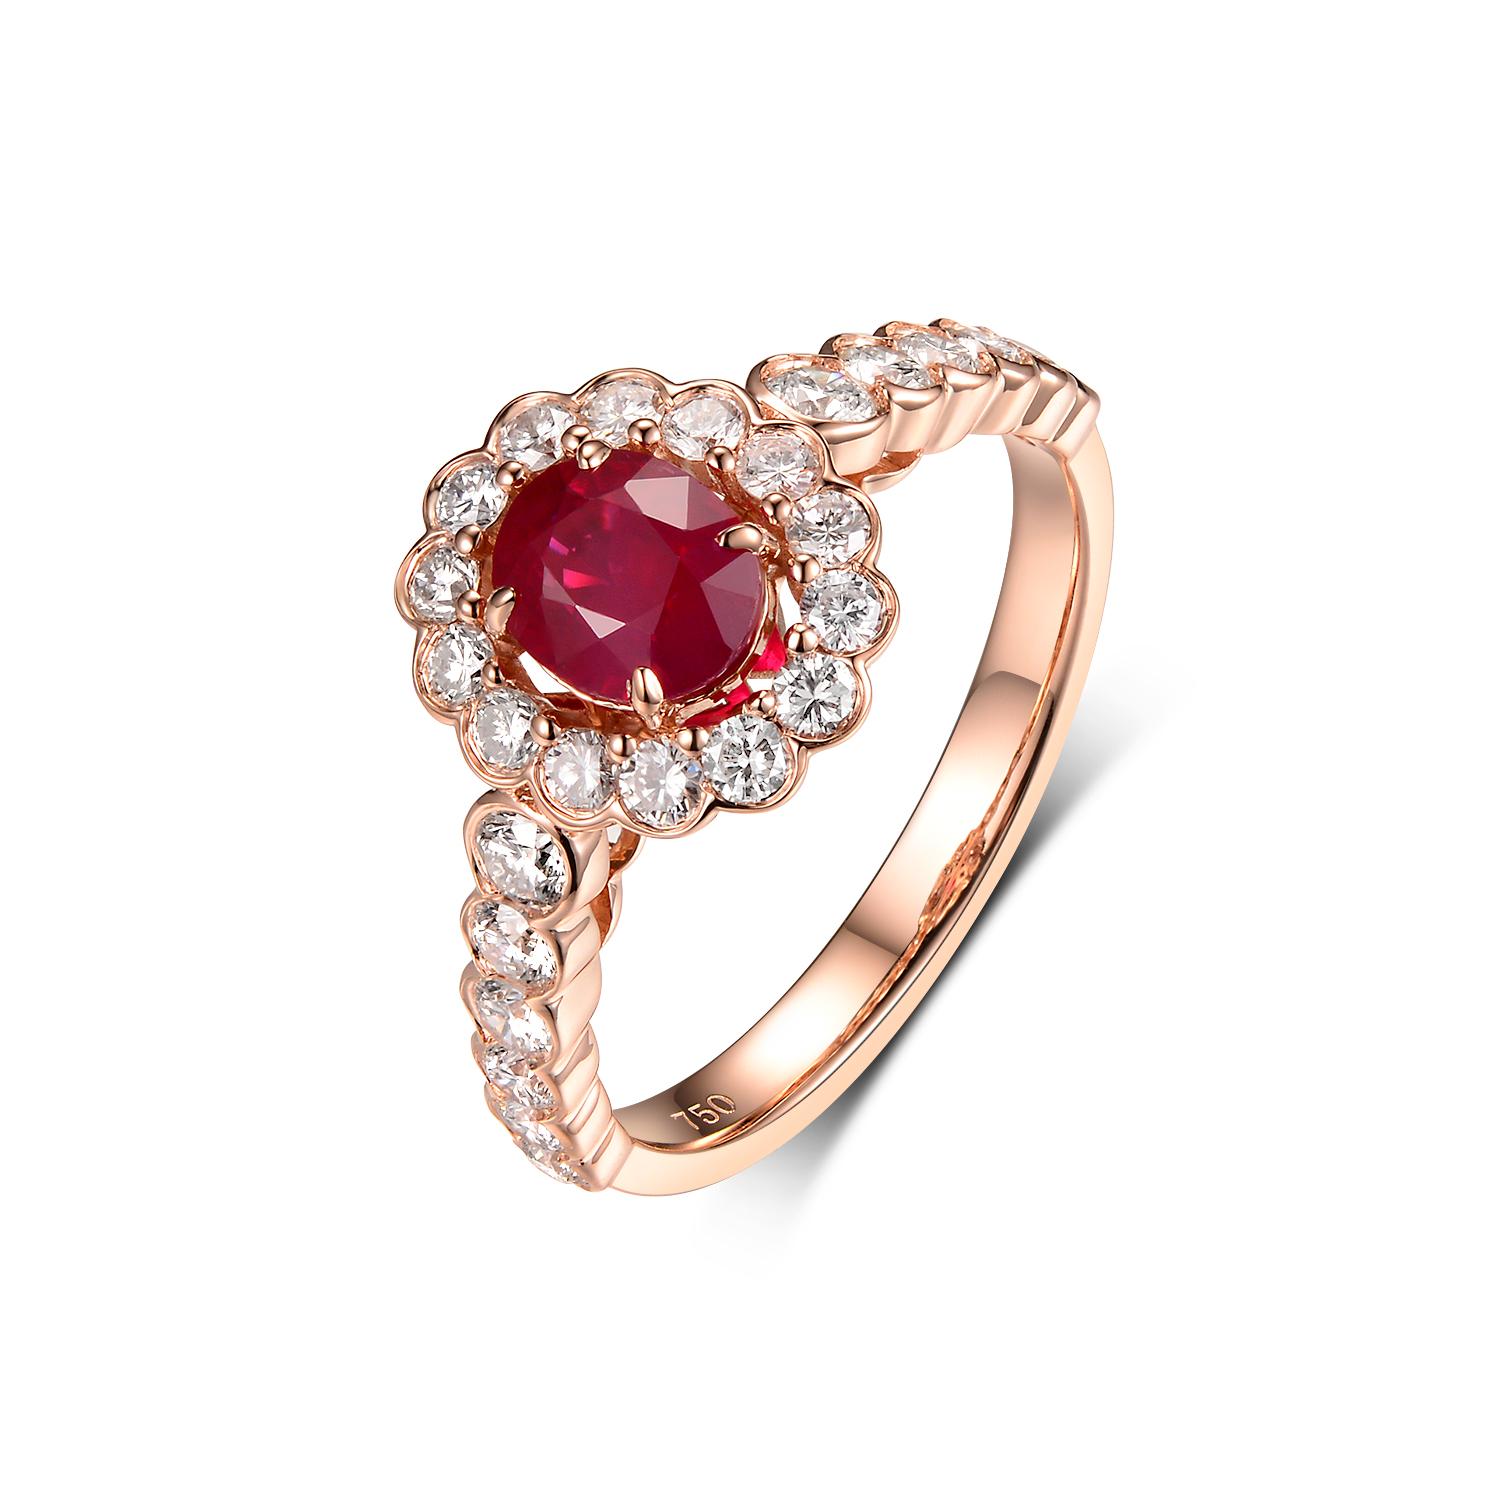 Crafted with the utmost elegance, this enchanting ring is a true testament to timeless design and luxury. The ring features a magnificent ruby, weighing 0.82 carats, at its center—a gemstone celebrated for its deep red hue and association with